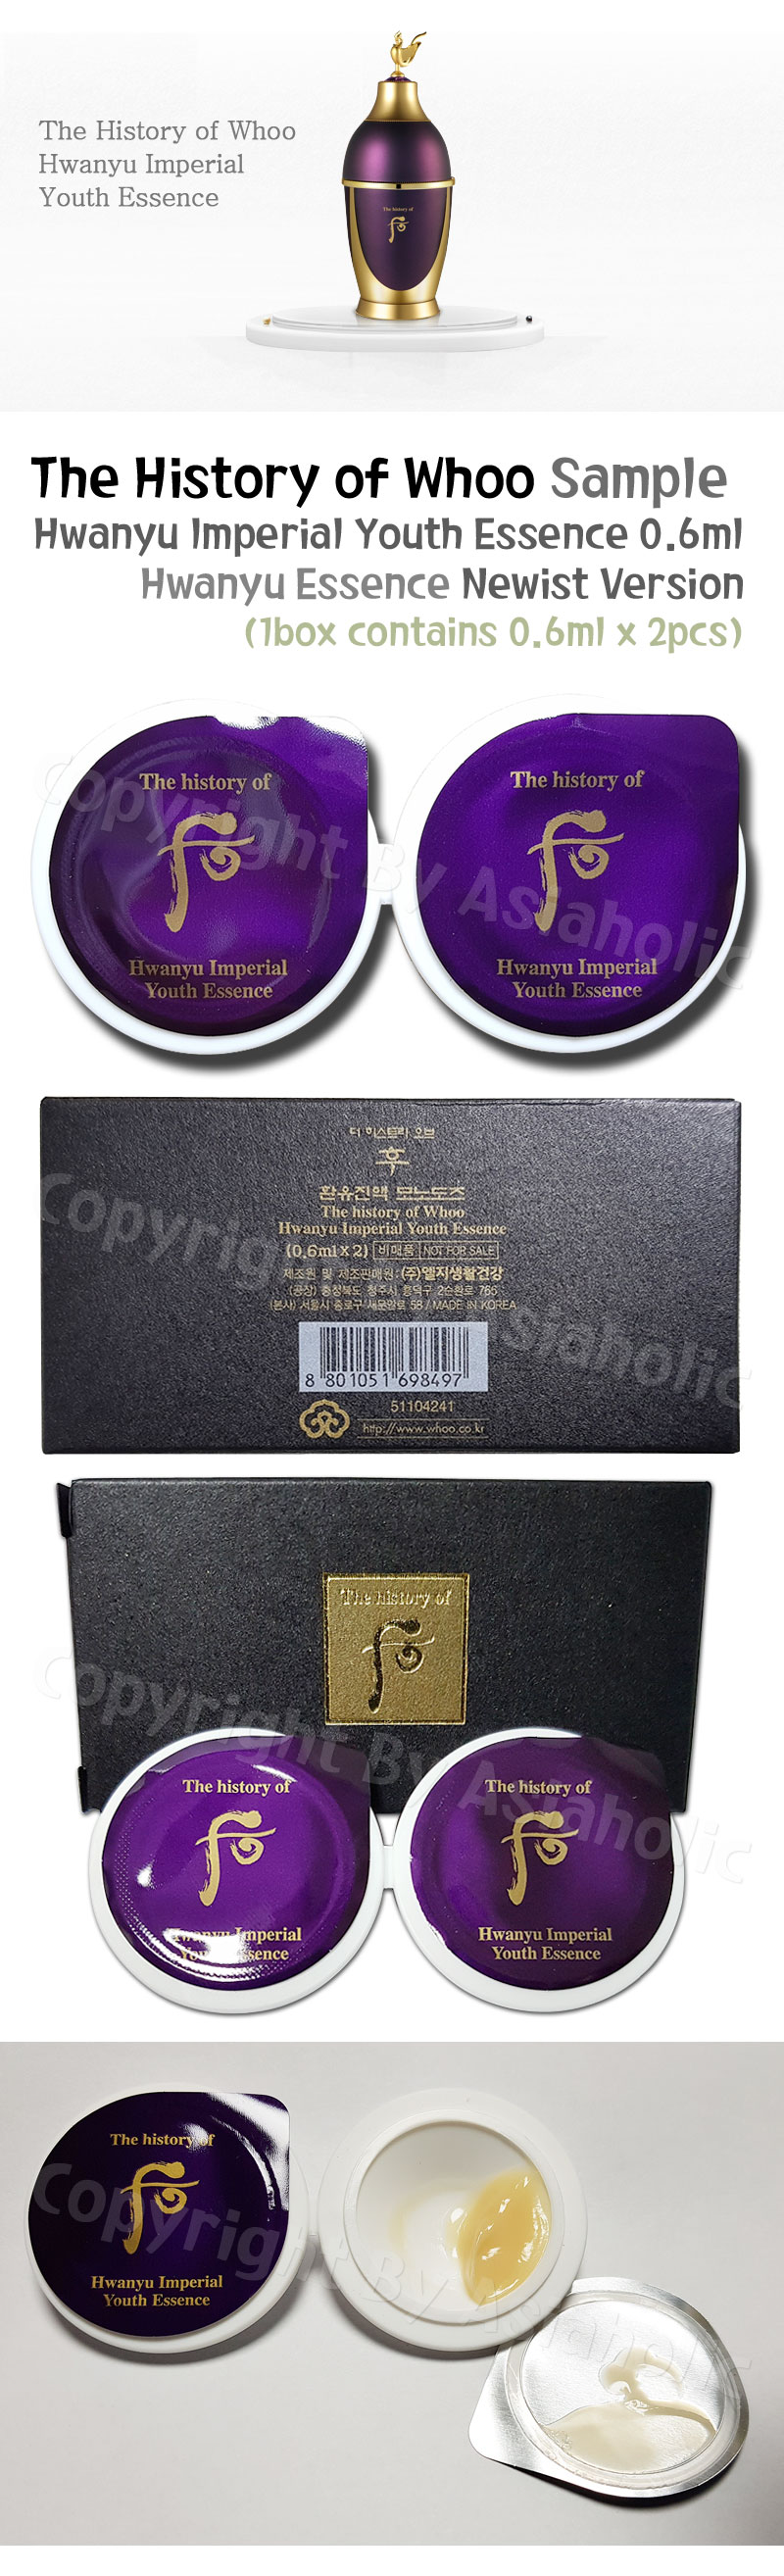 The history of Whoo Hwanyu Imperial Youth Essence 0.6ml x 30pcs (15Box) Newest Version